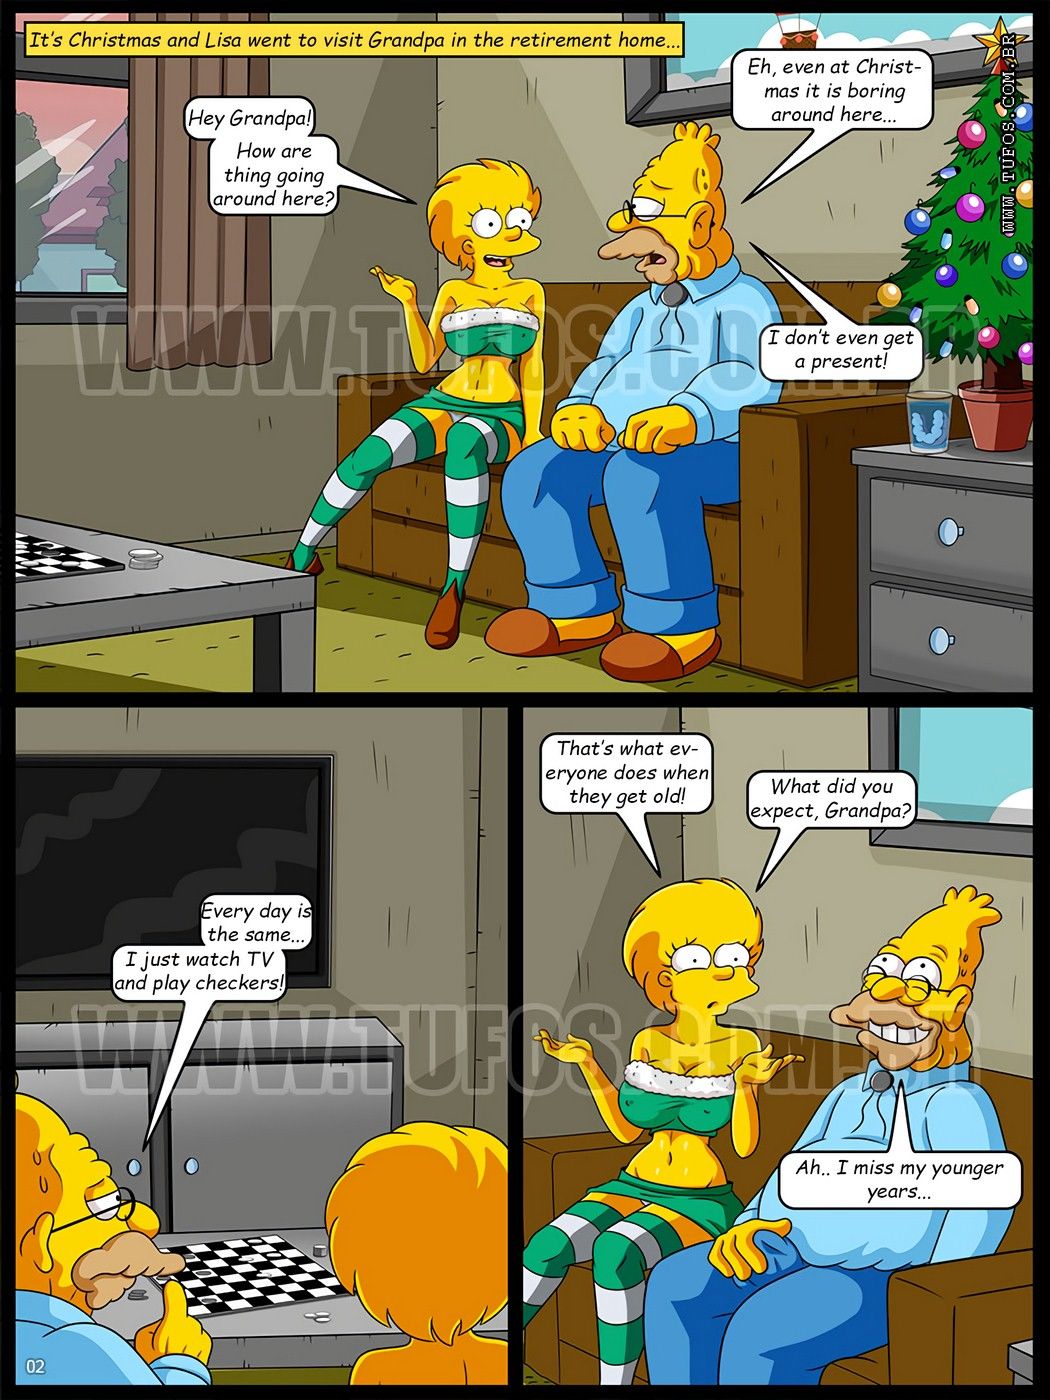 The Simpsons 10 - Christmas at the Retirement Home - Tufos page 2